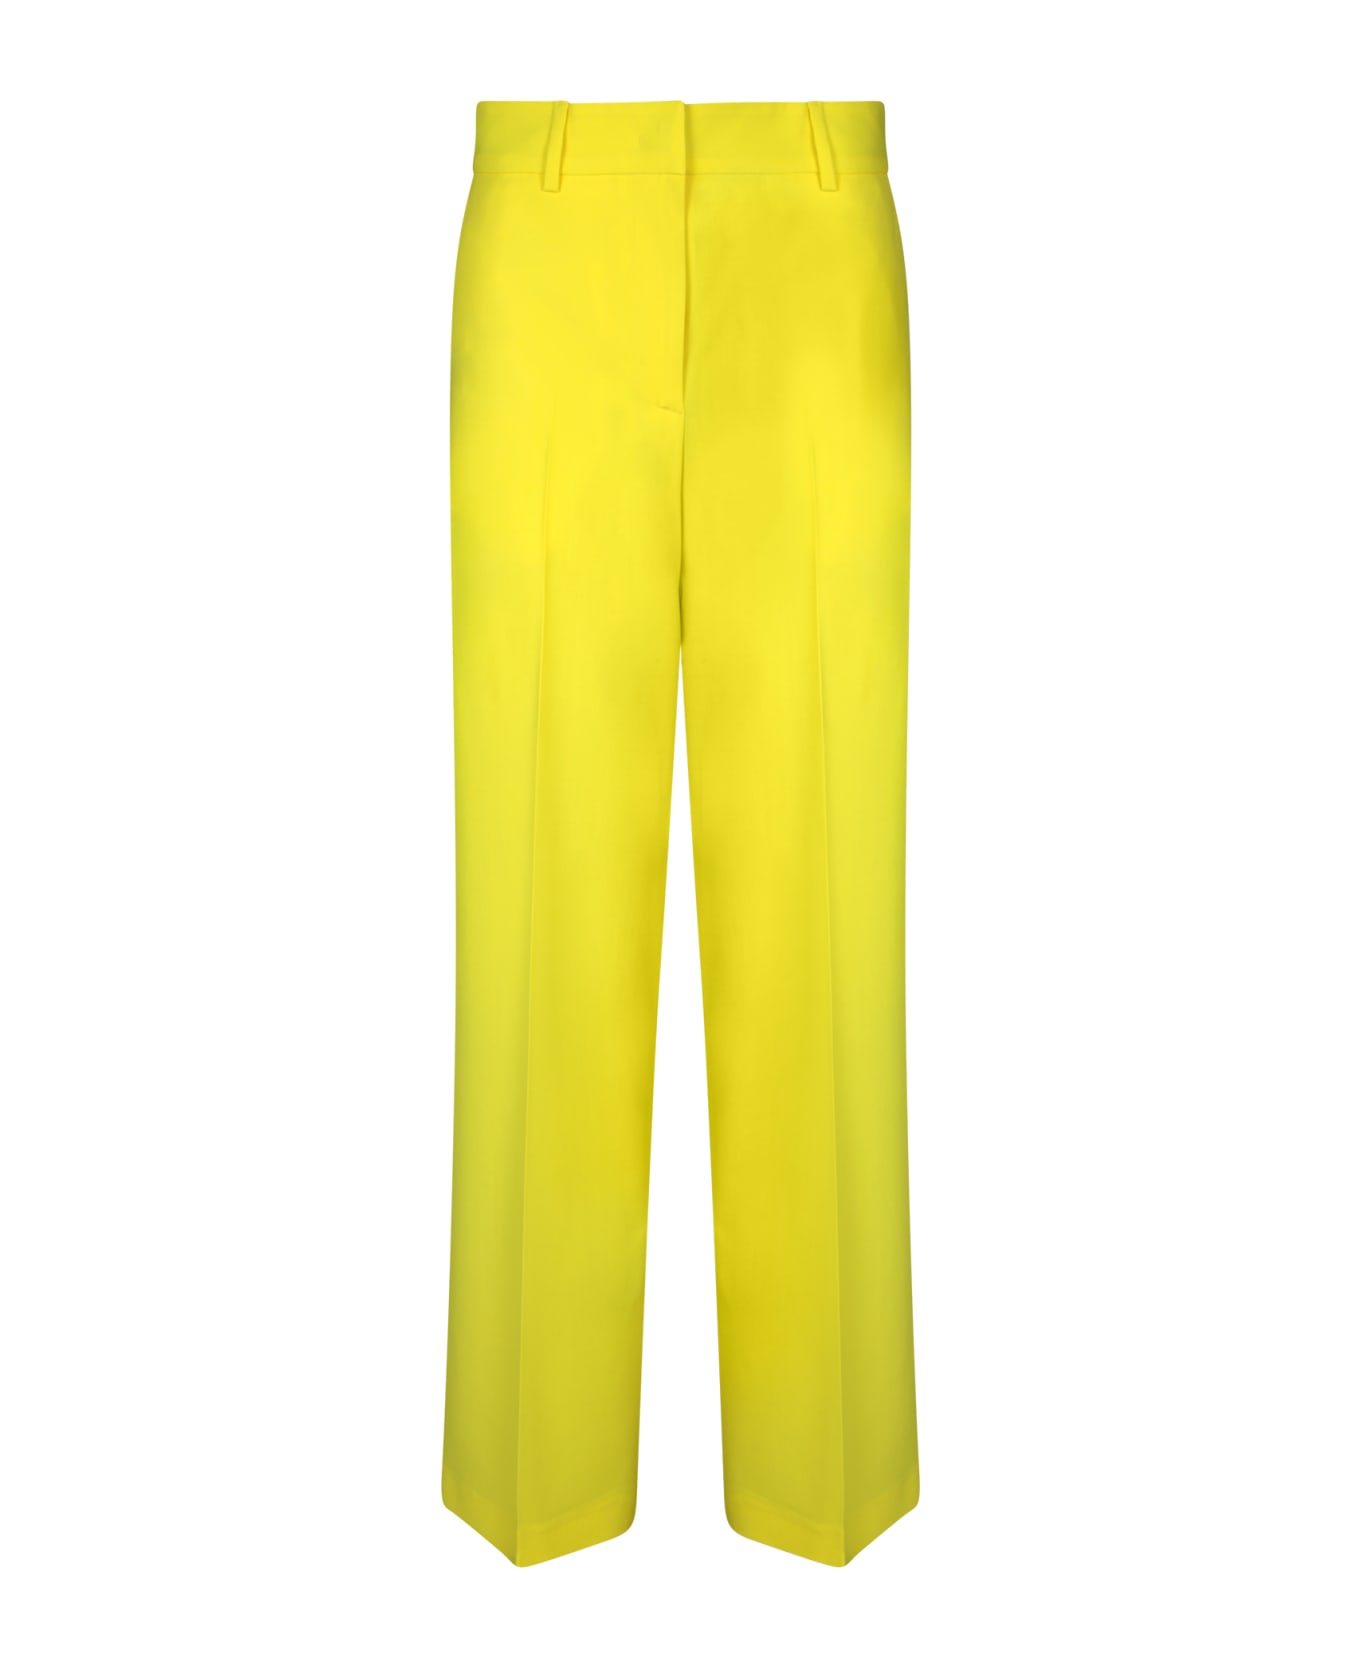 MSGM White Tailored Trousers - Yellow ボトムス